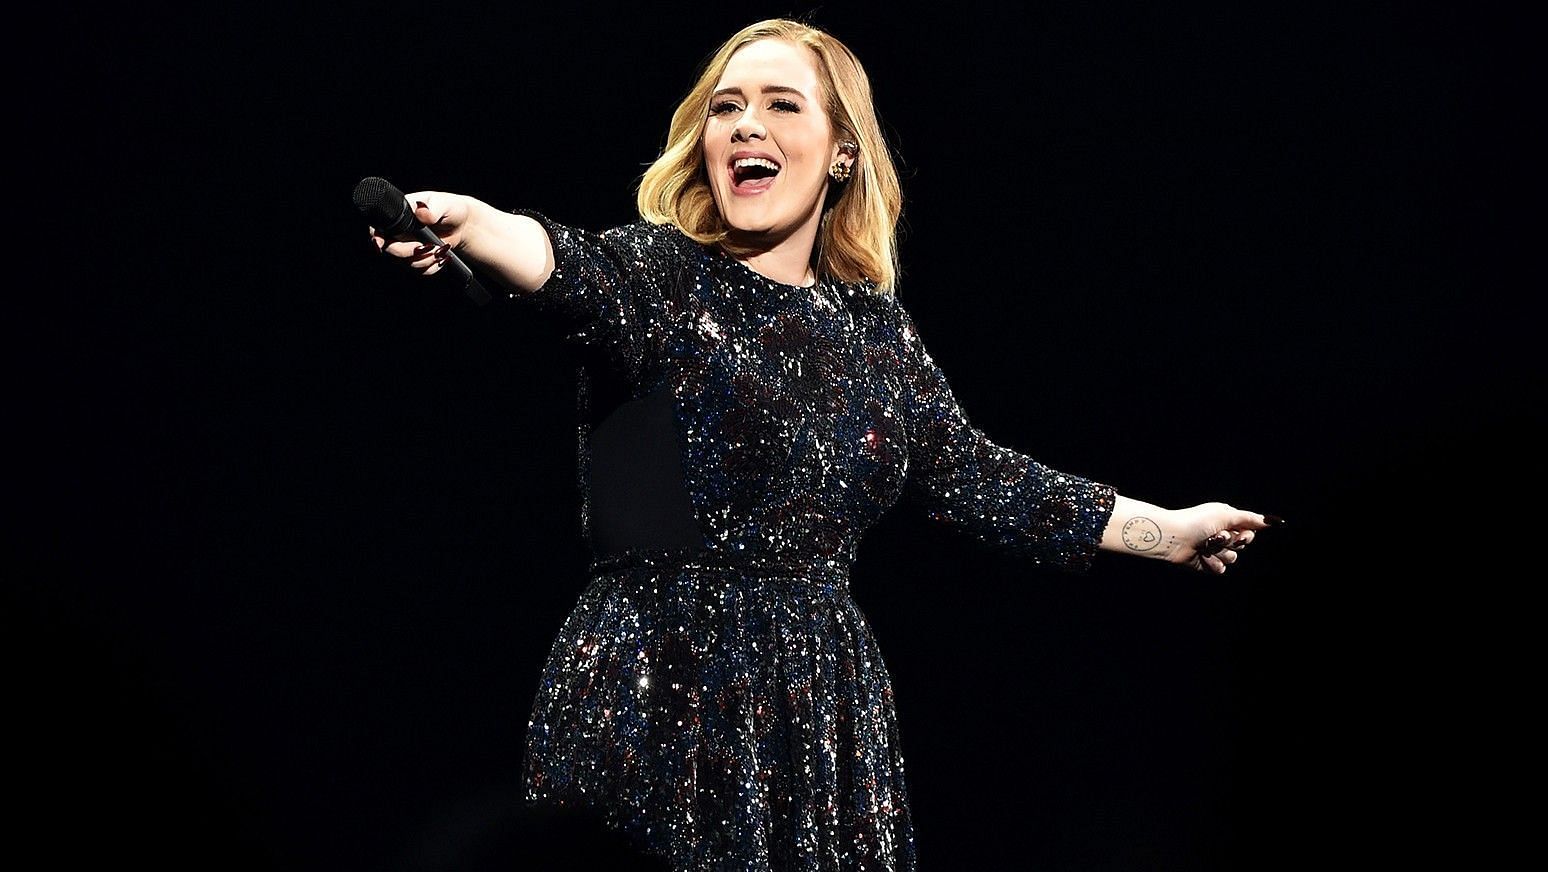 Adele issued a tearful apology video for canceling her Las Vegas Residency (Image via Getty Images)